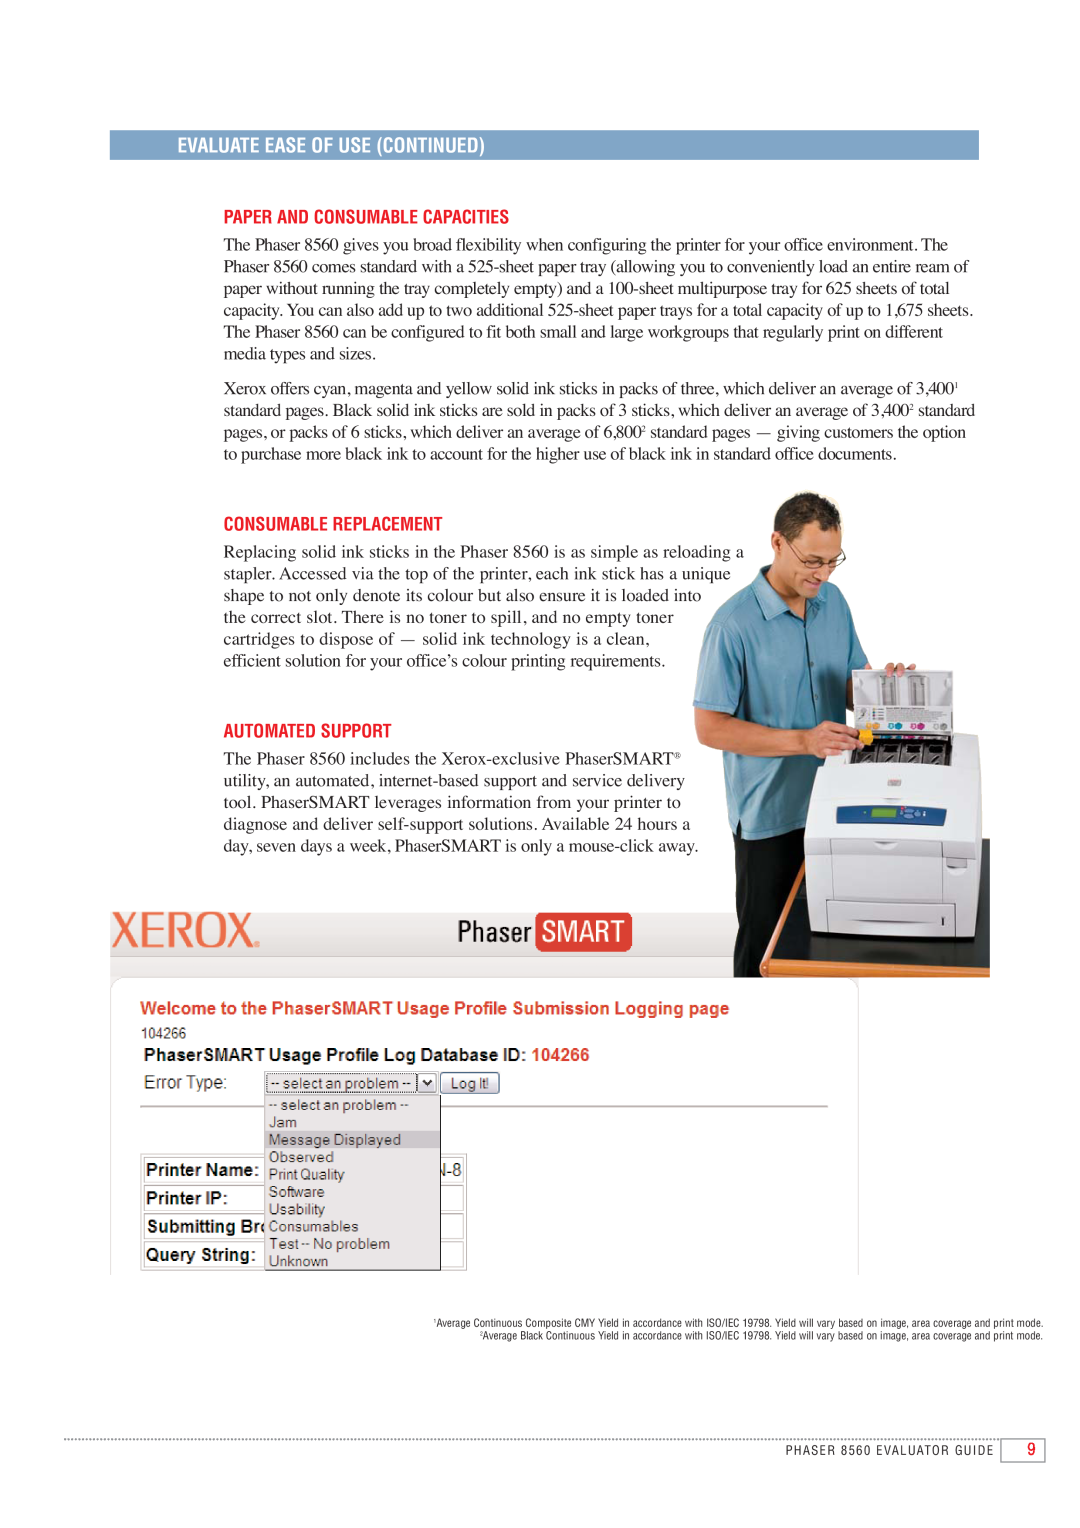 Xerox 8560 Evaluate Ease Of Use Continued, Paper And Consumable Capacities, Consumable Replacement, Automated Support 